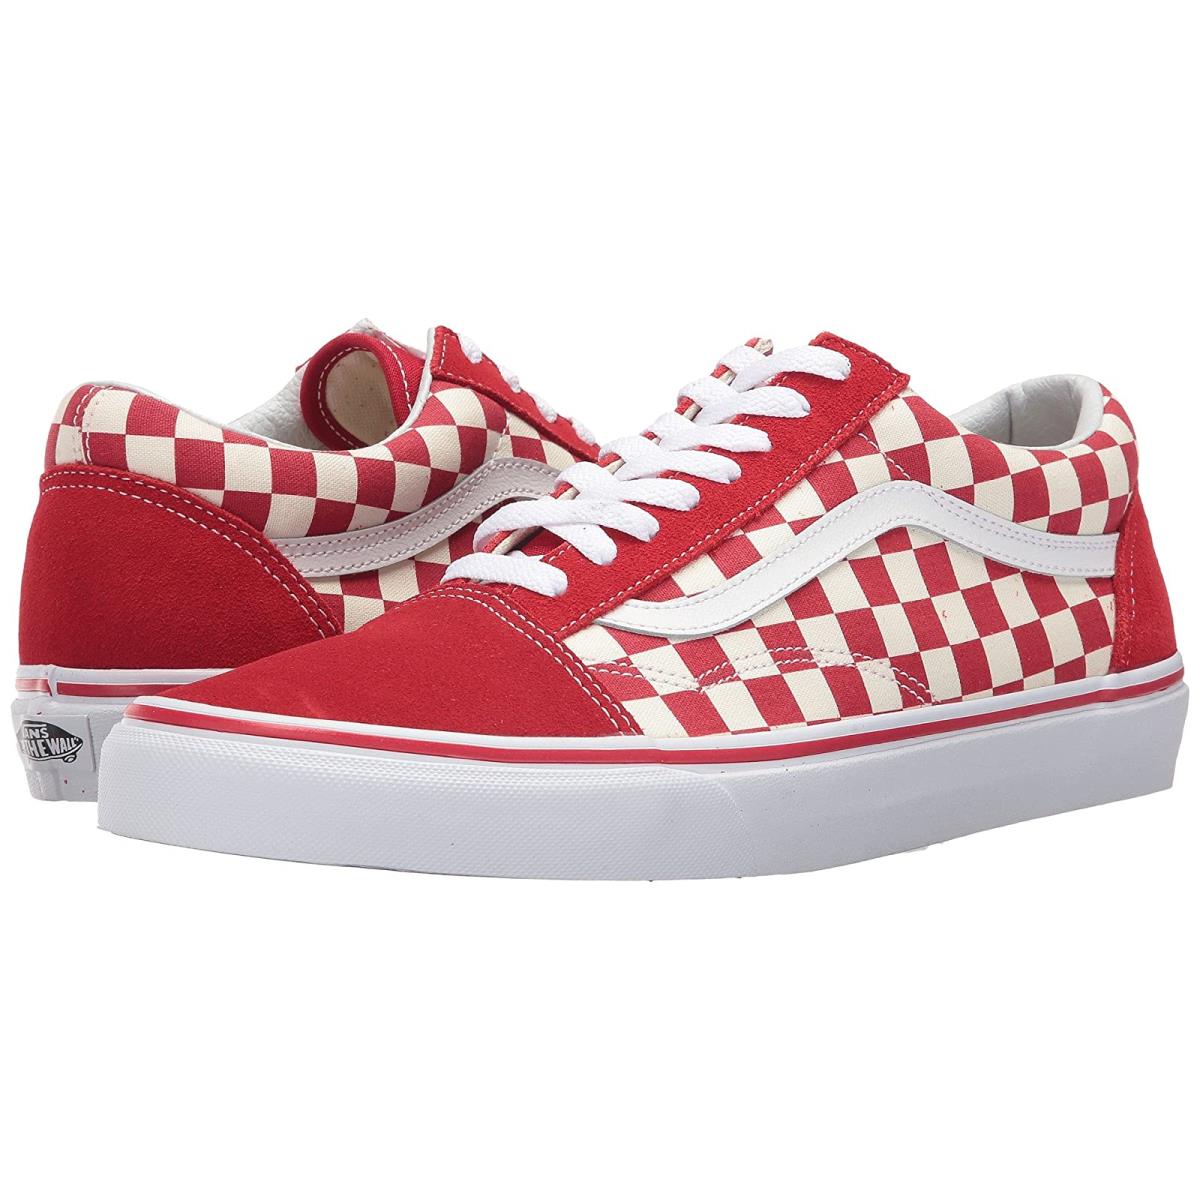 Unisex Sneakers Athletic Shoes Vans Old Skool (Primary Check) Racing Red/White